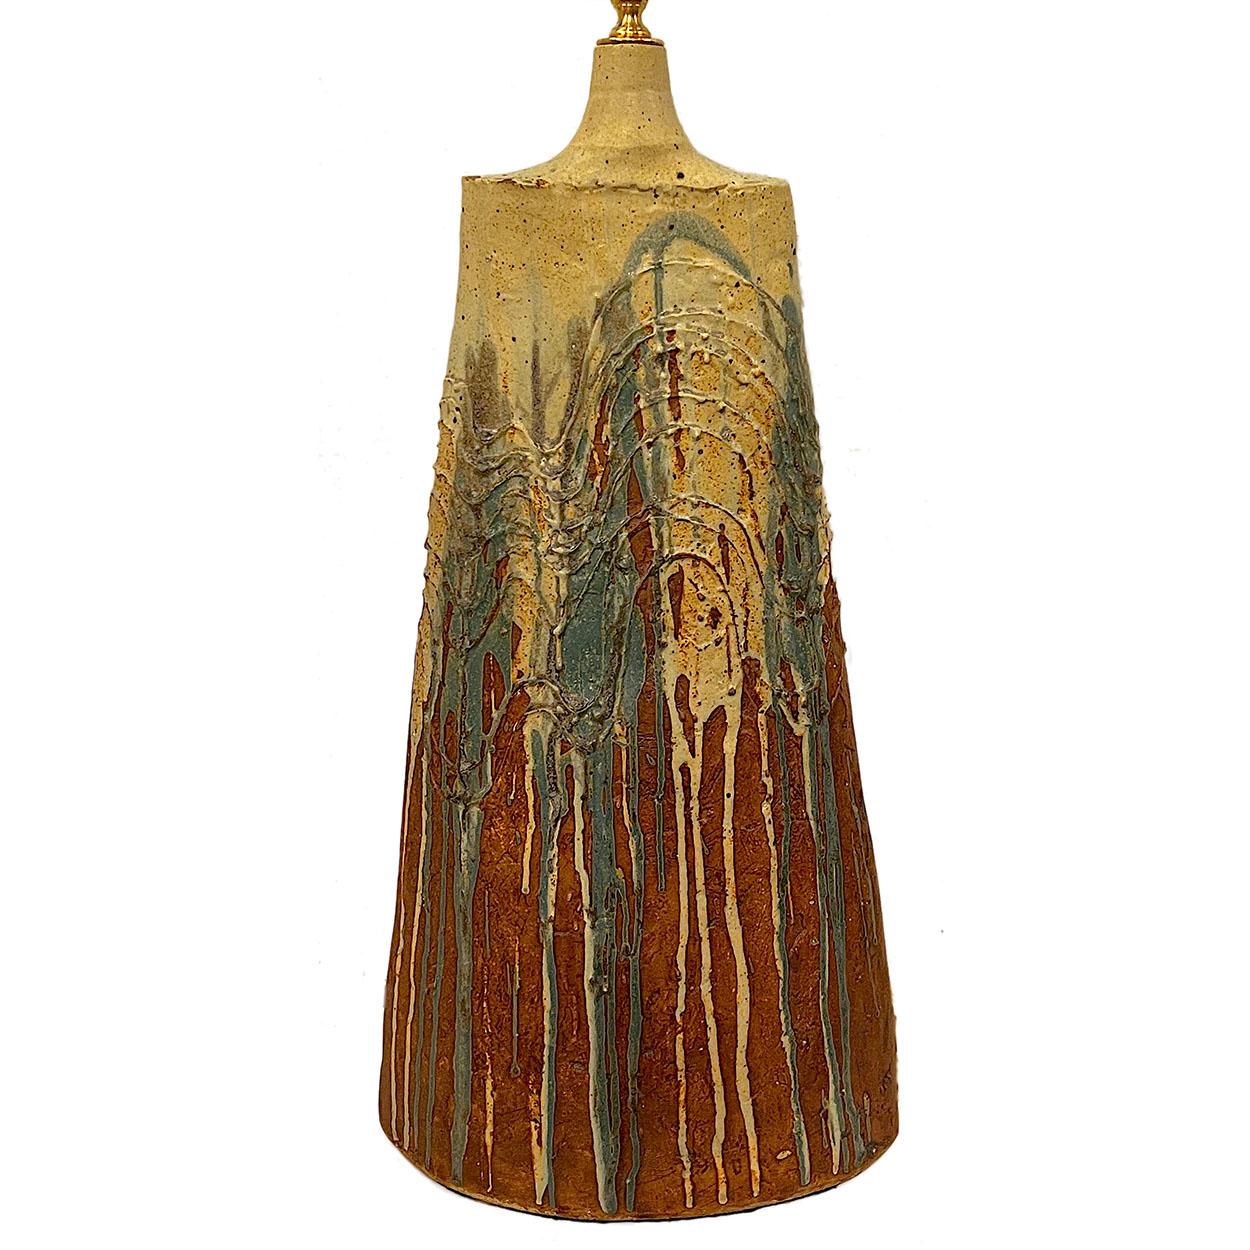 A circa 1950's ceramic table lamp with glazed finish.

Measurements:
Height of body: 24